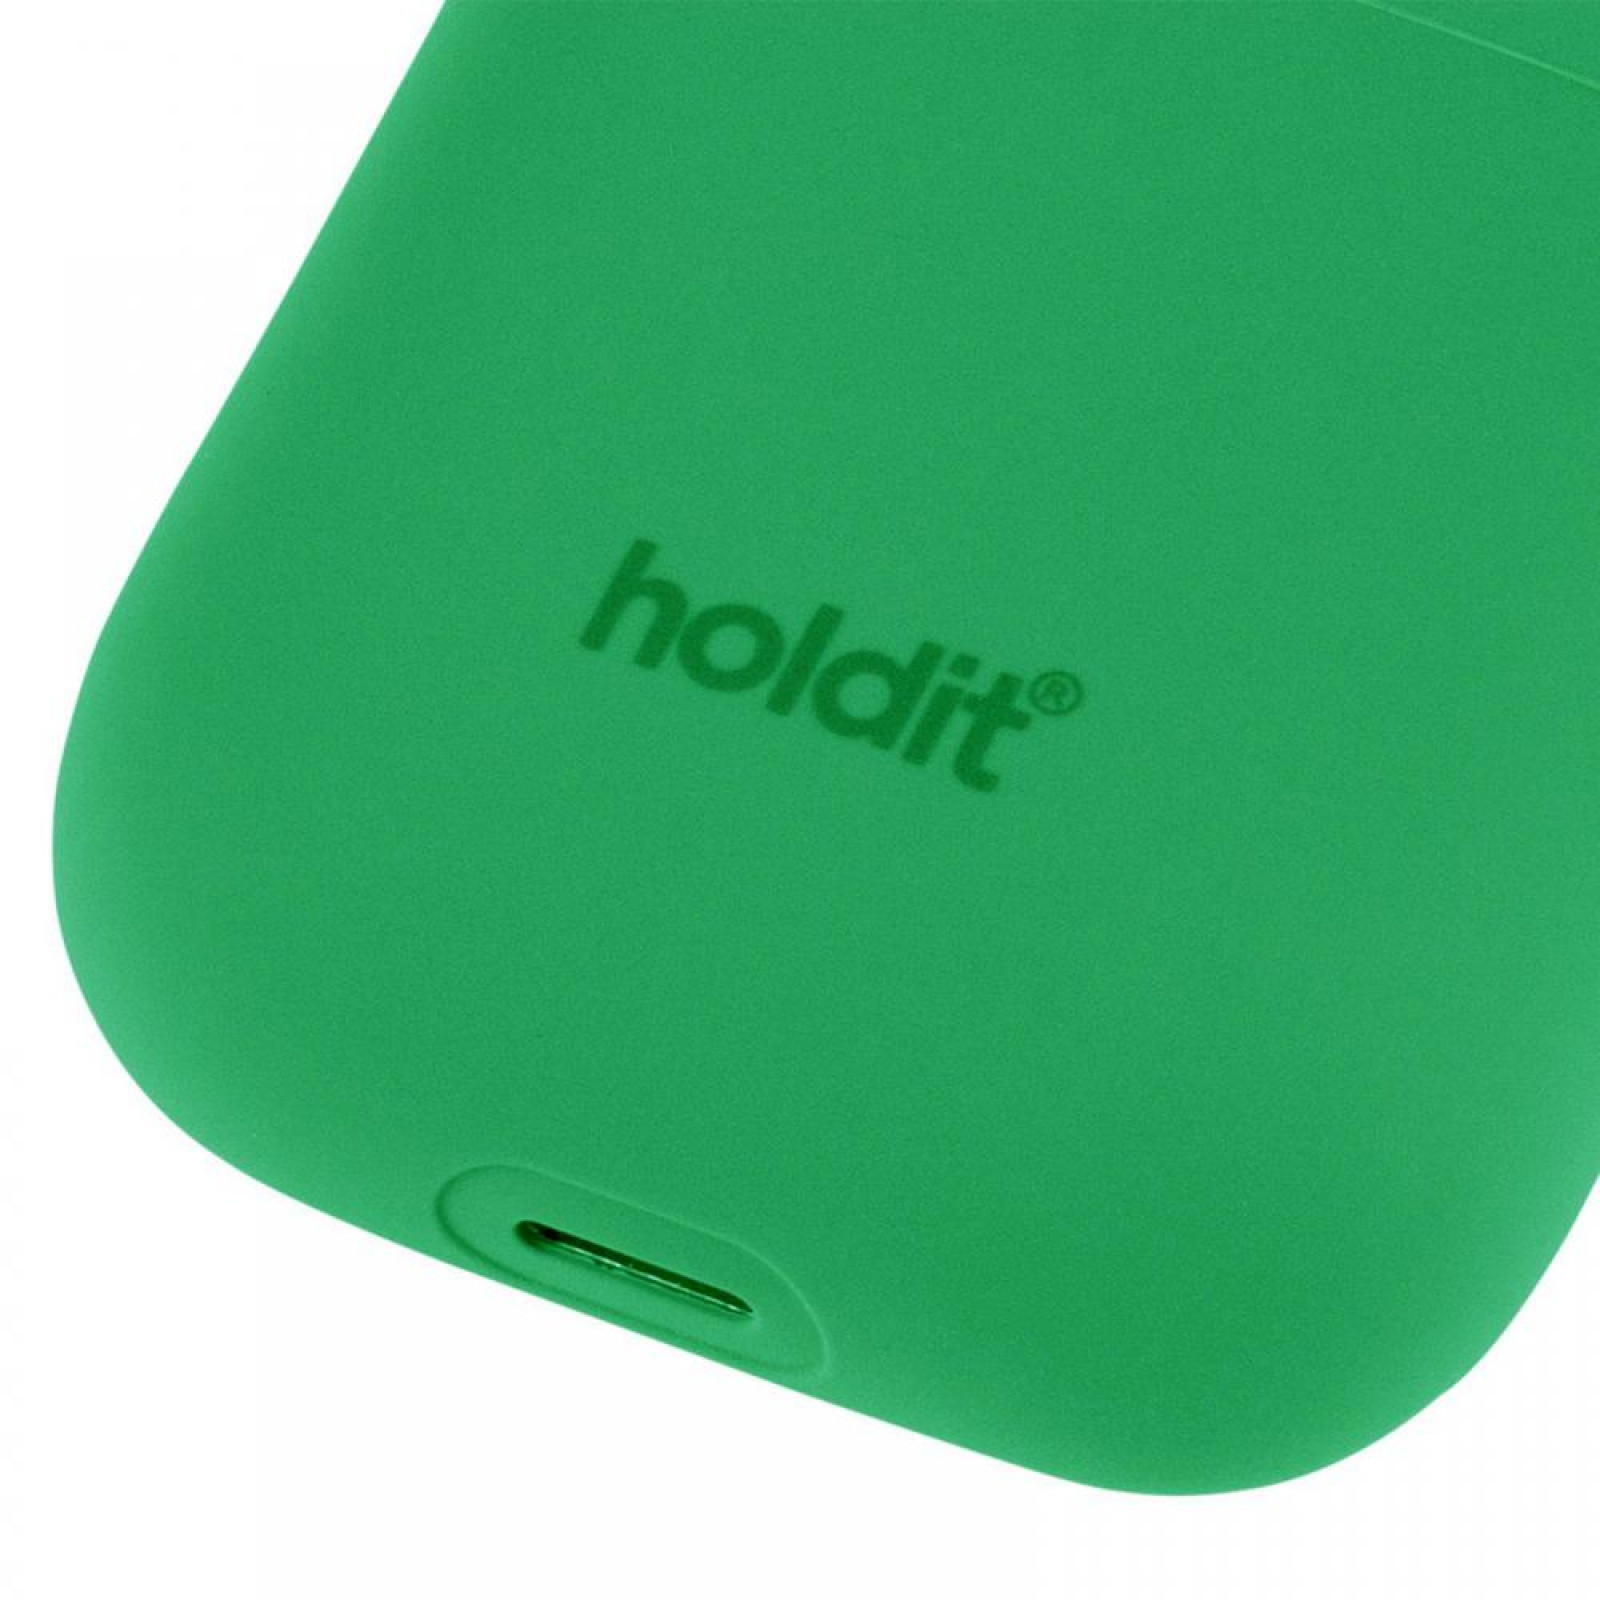 Калъф Holdit Silicone Case за  AirPods 1/2  - Зелен